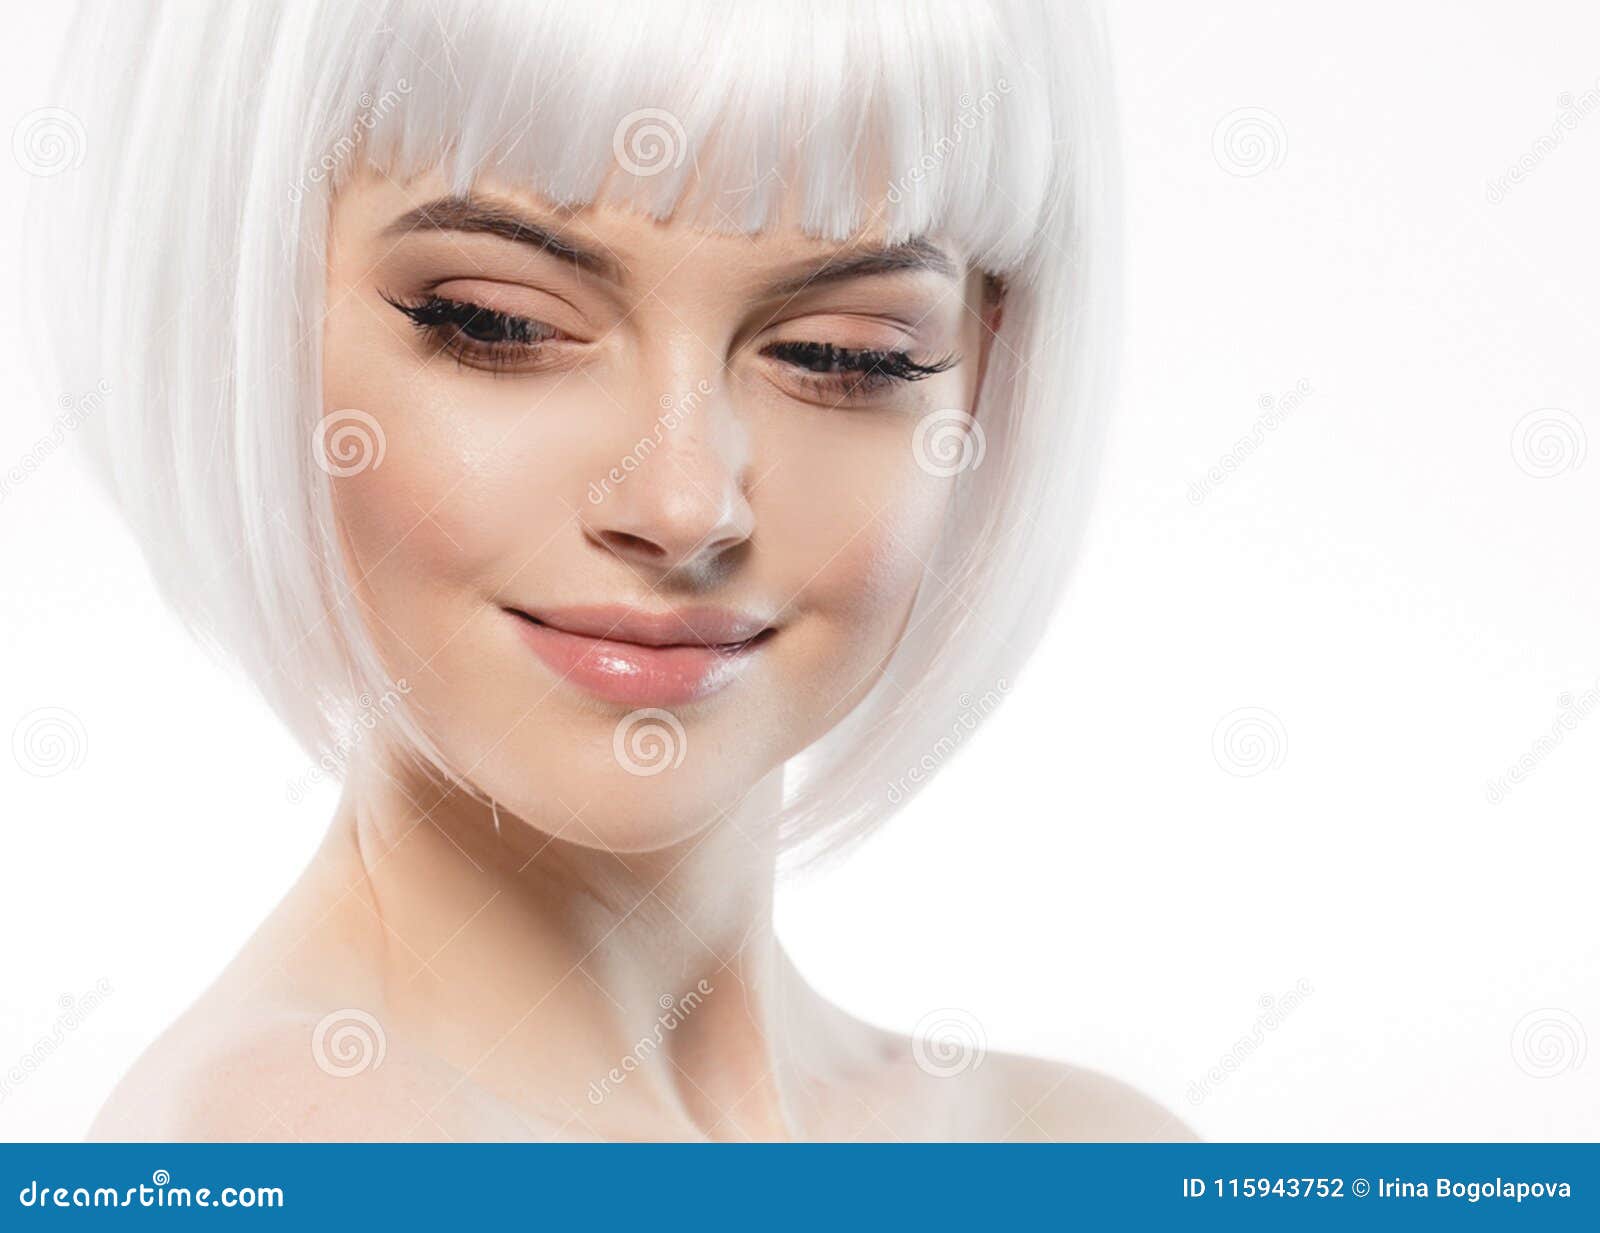 Blonde Texturized Short Hair with Bangs - wide 5